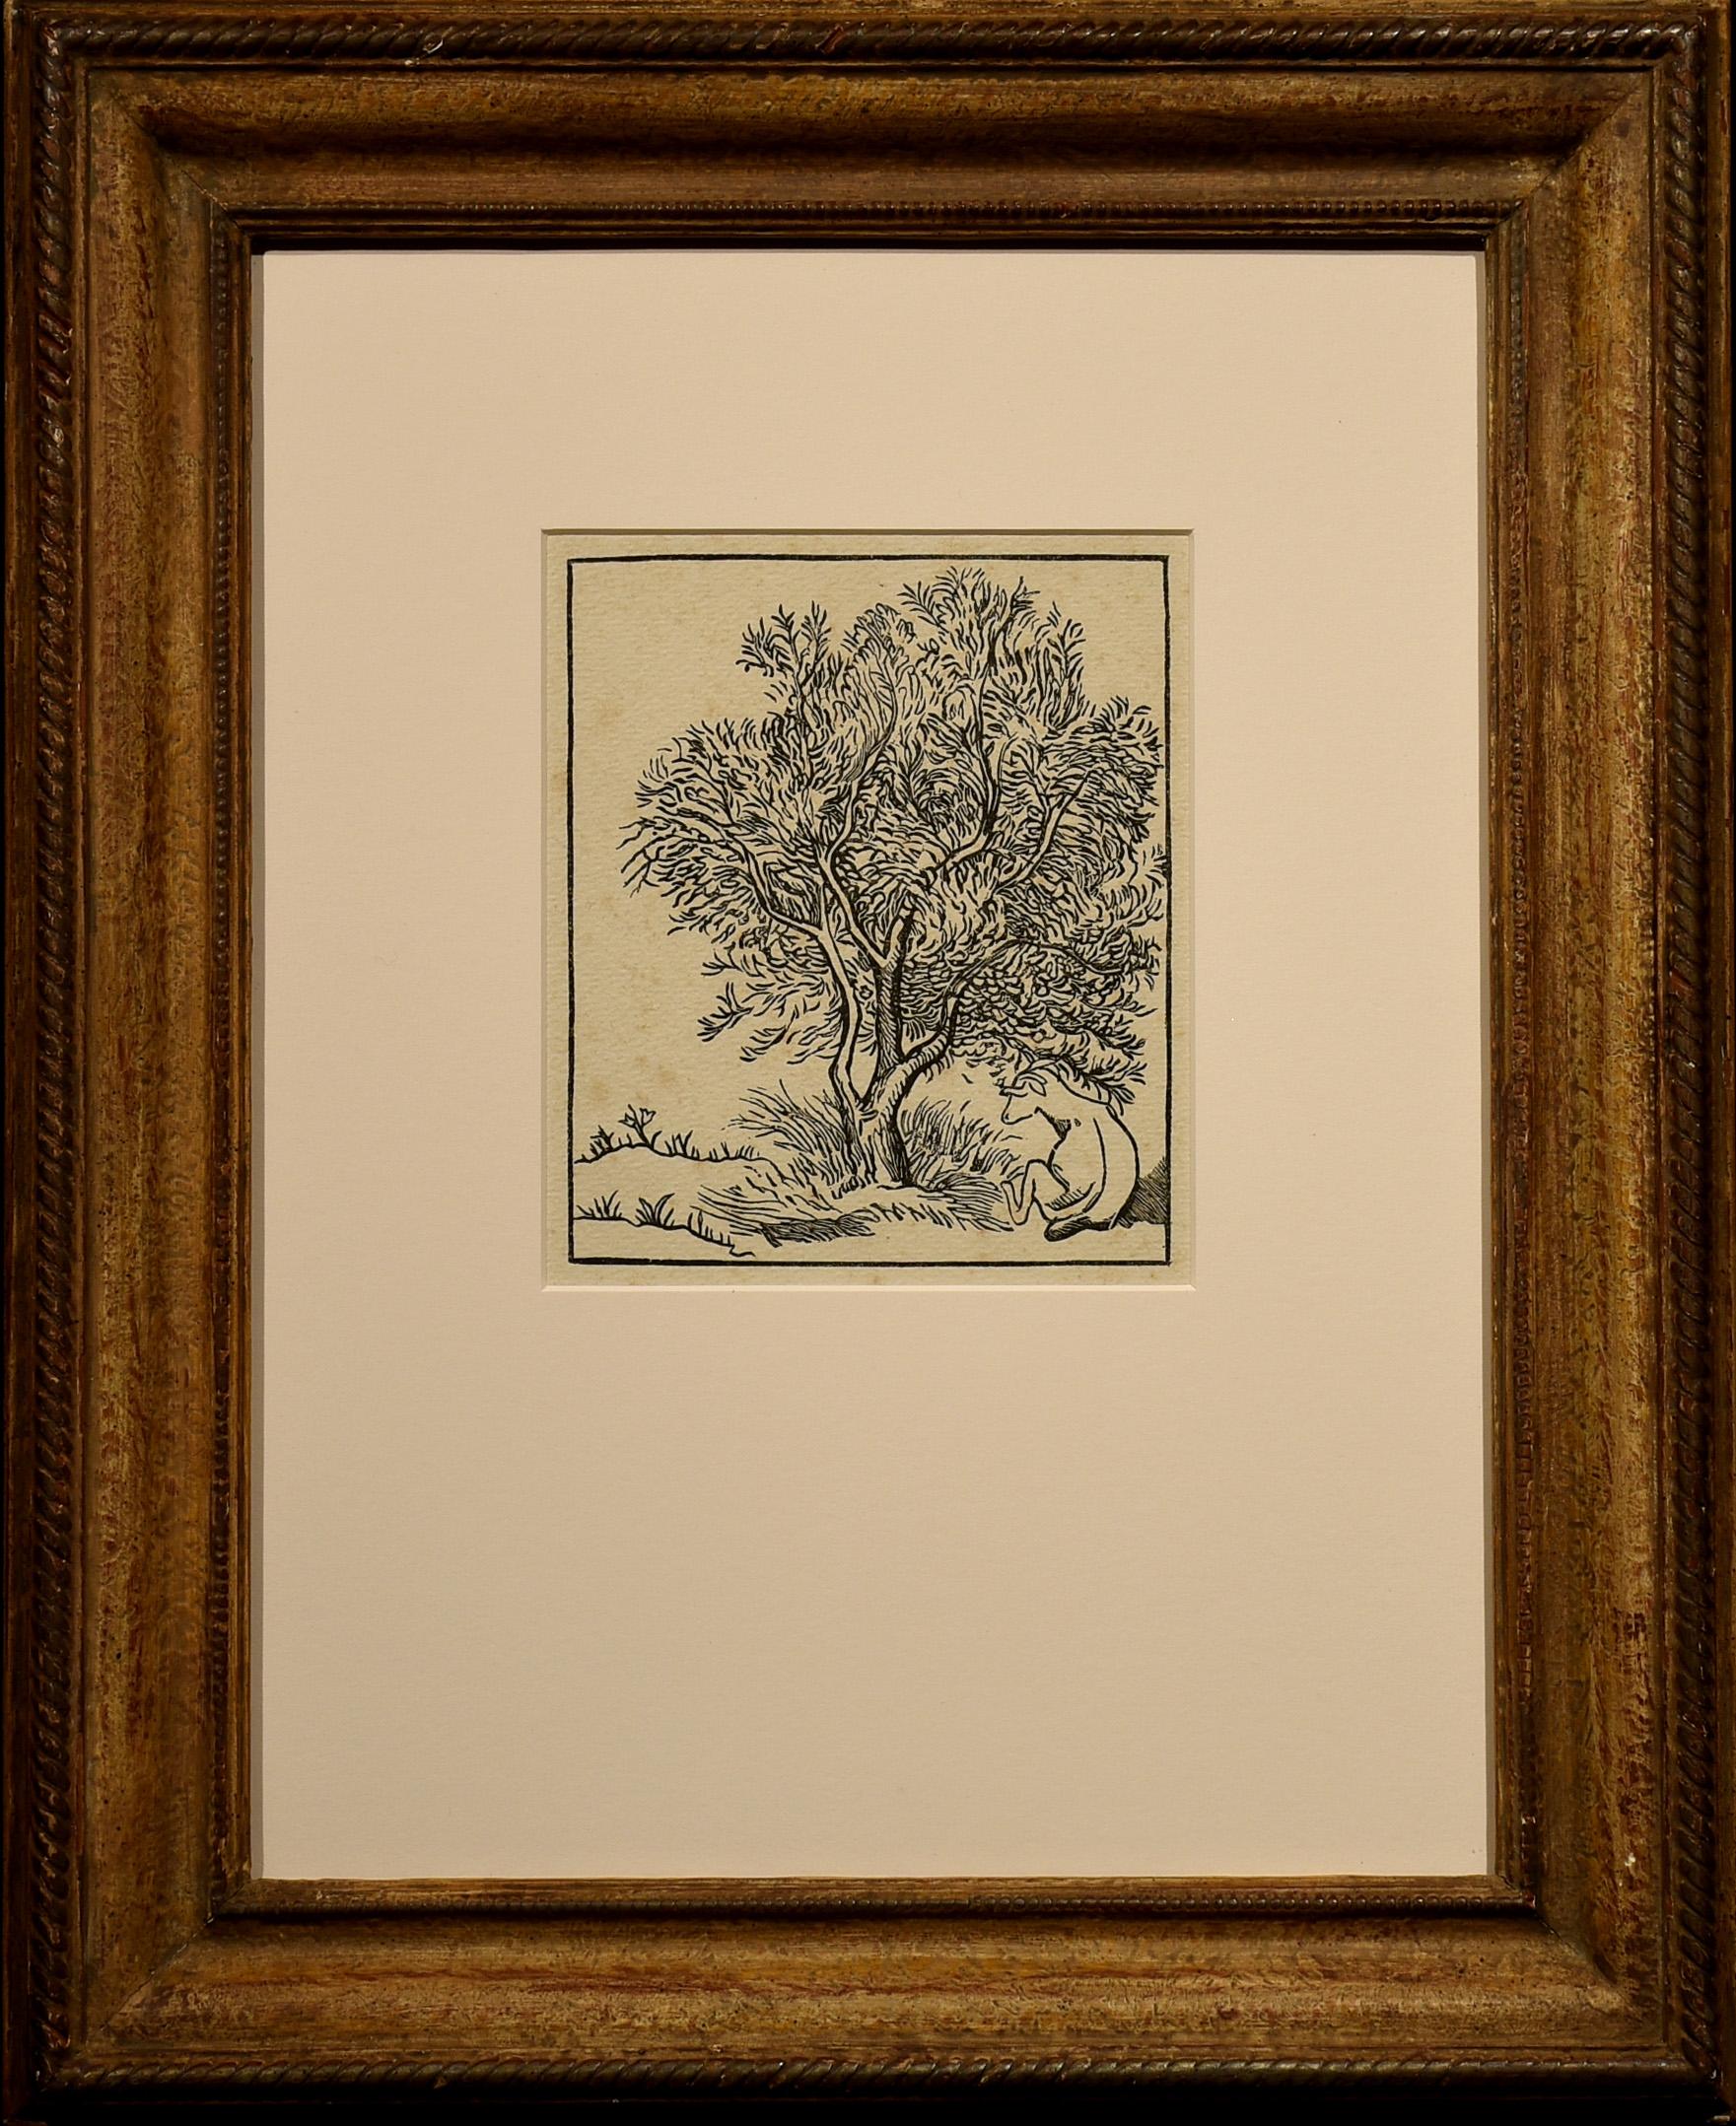 Goat Under an Olive Tree - Print by Aristide Maillol